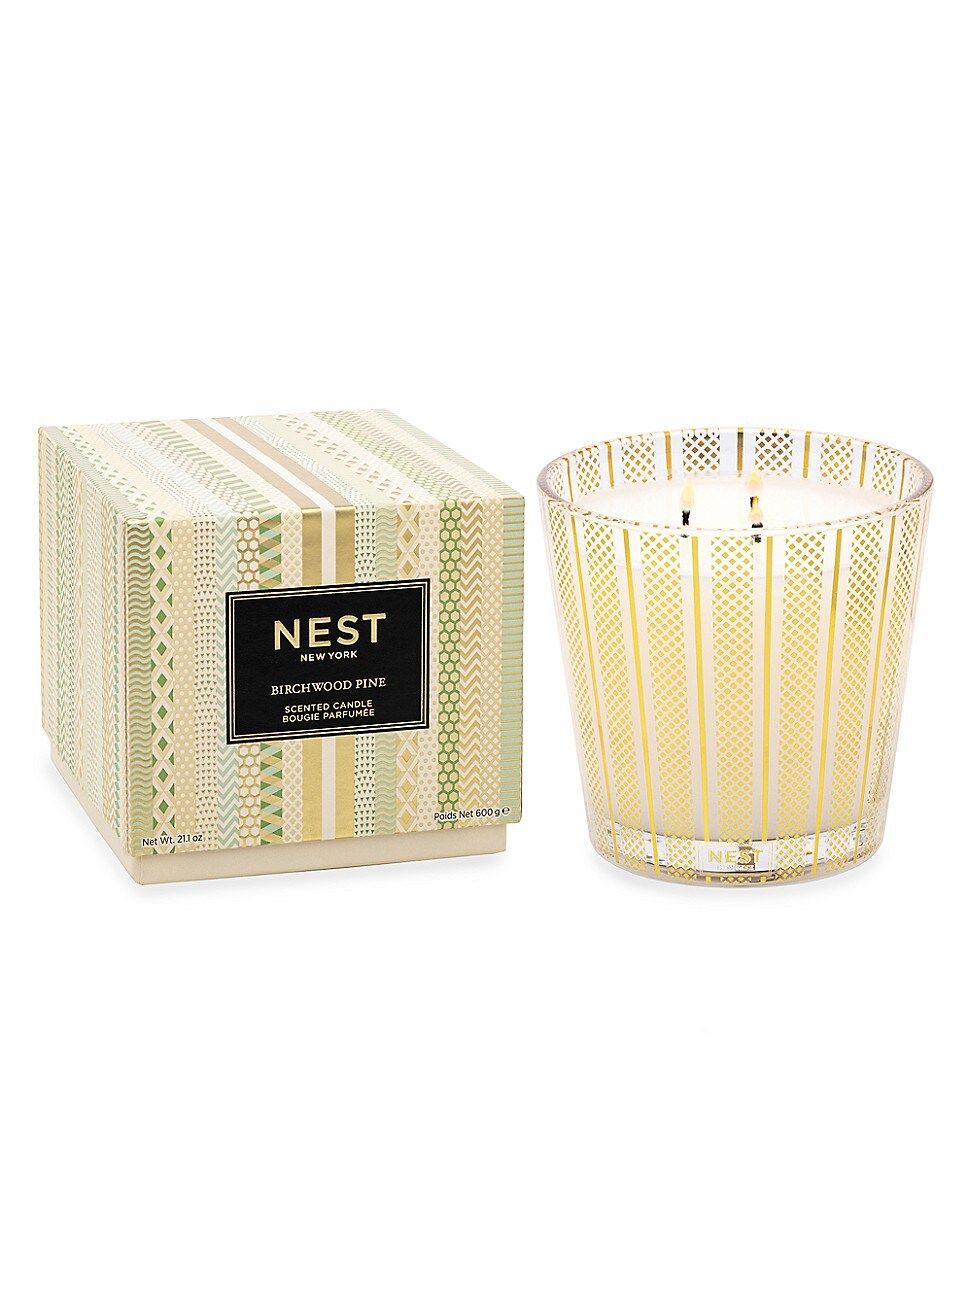 Birchwood Pine 3-Wick Scented Candle | Saks Fifth Avenue